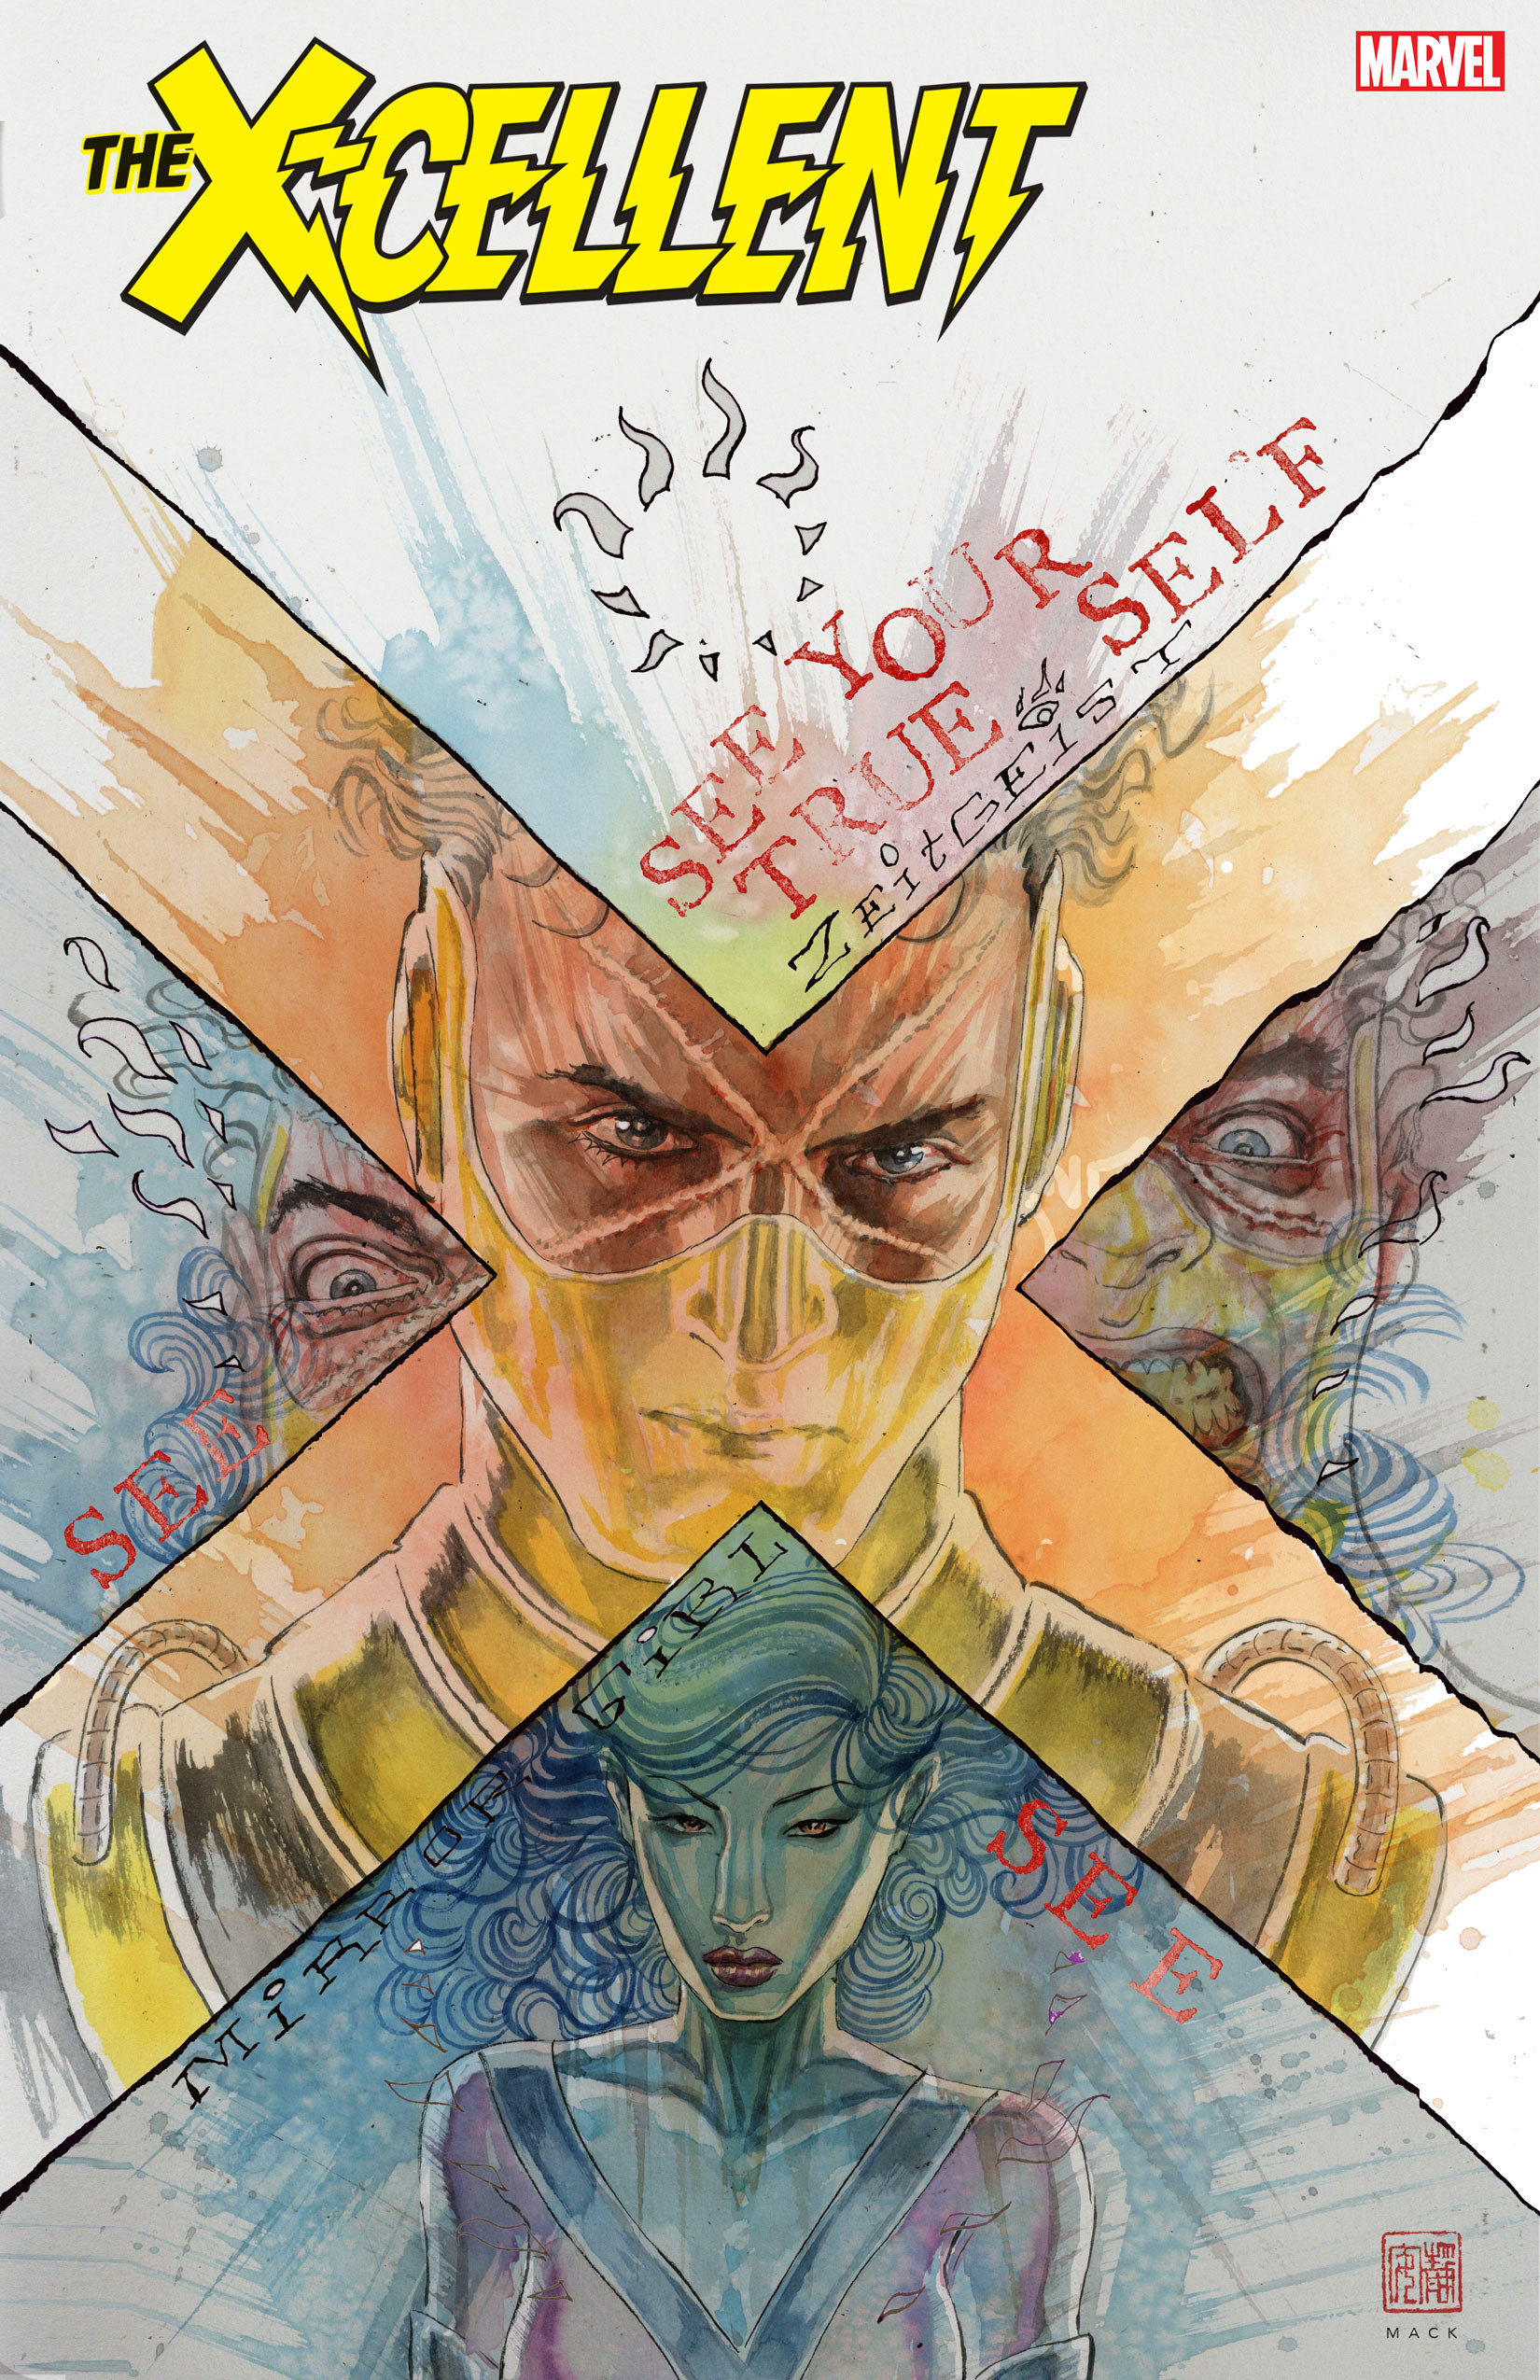 The X-Cellent #1 1 for 25 Incentive David Mack (2022)